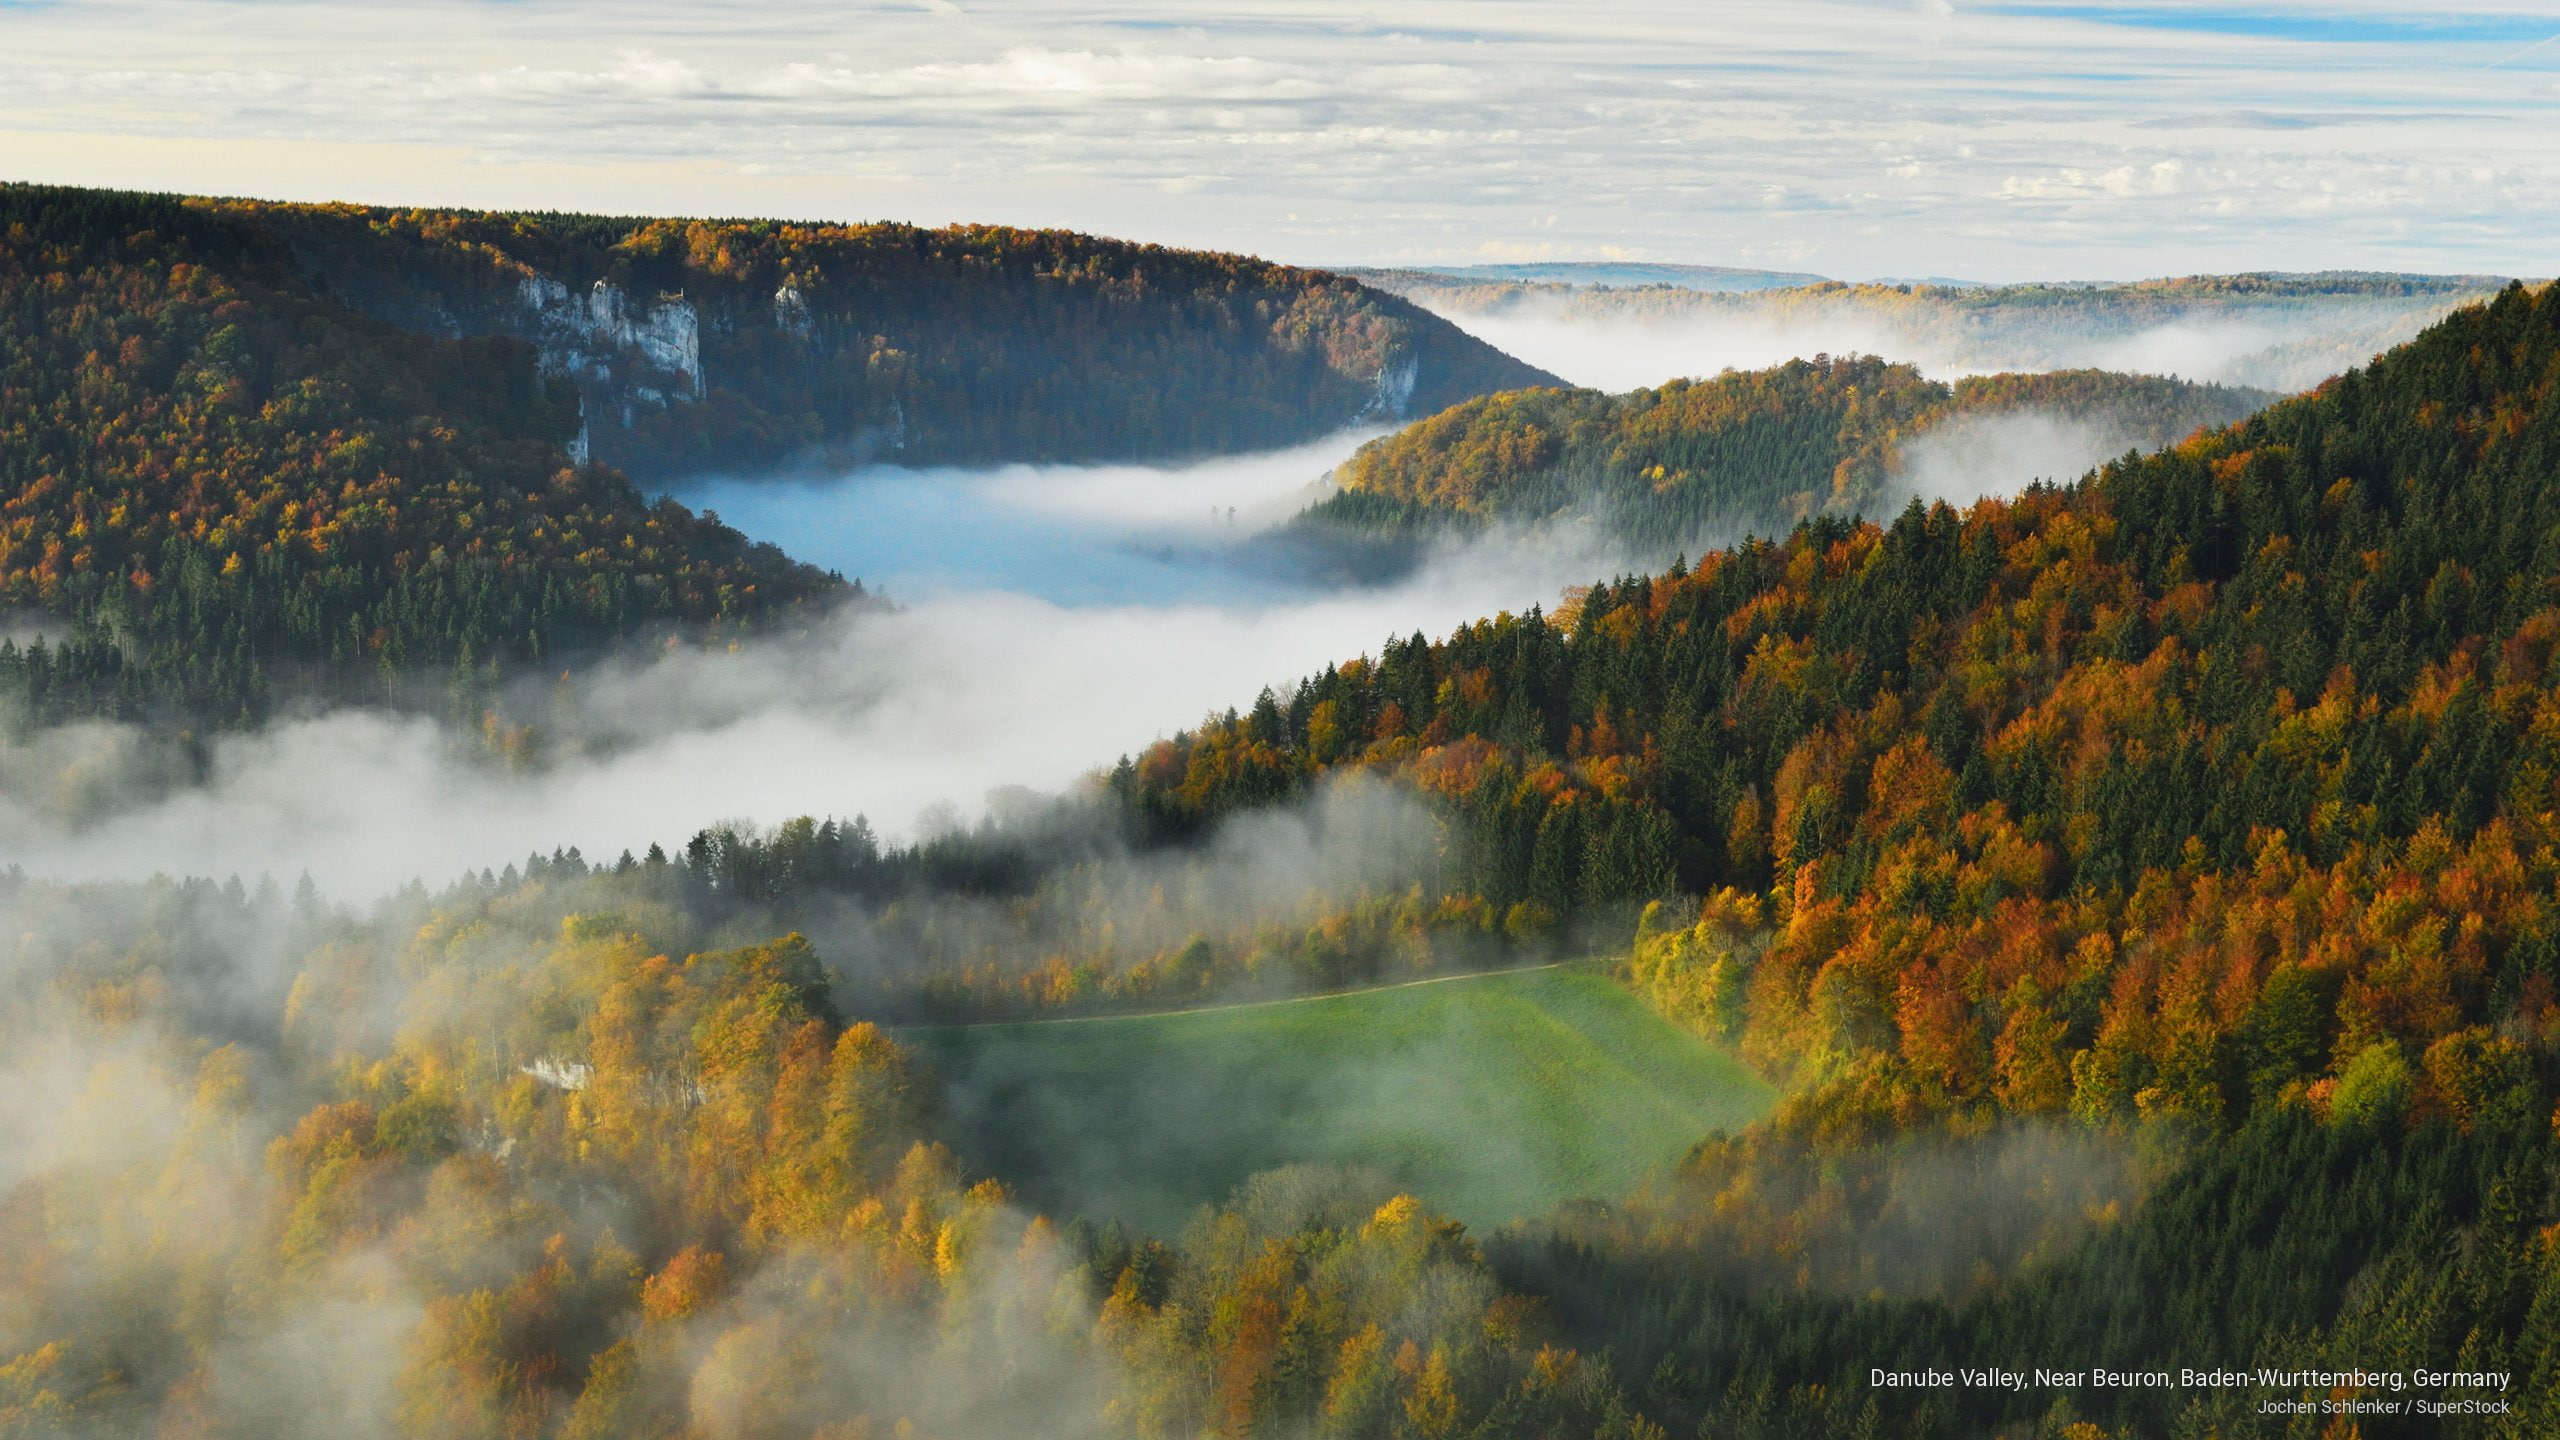 Danube Valley, Near Beuron, Baden-Wurttemberg, Germany, Nature